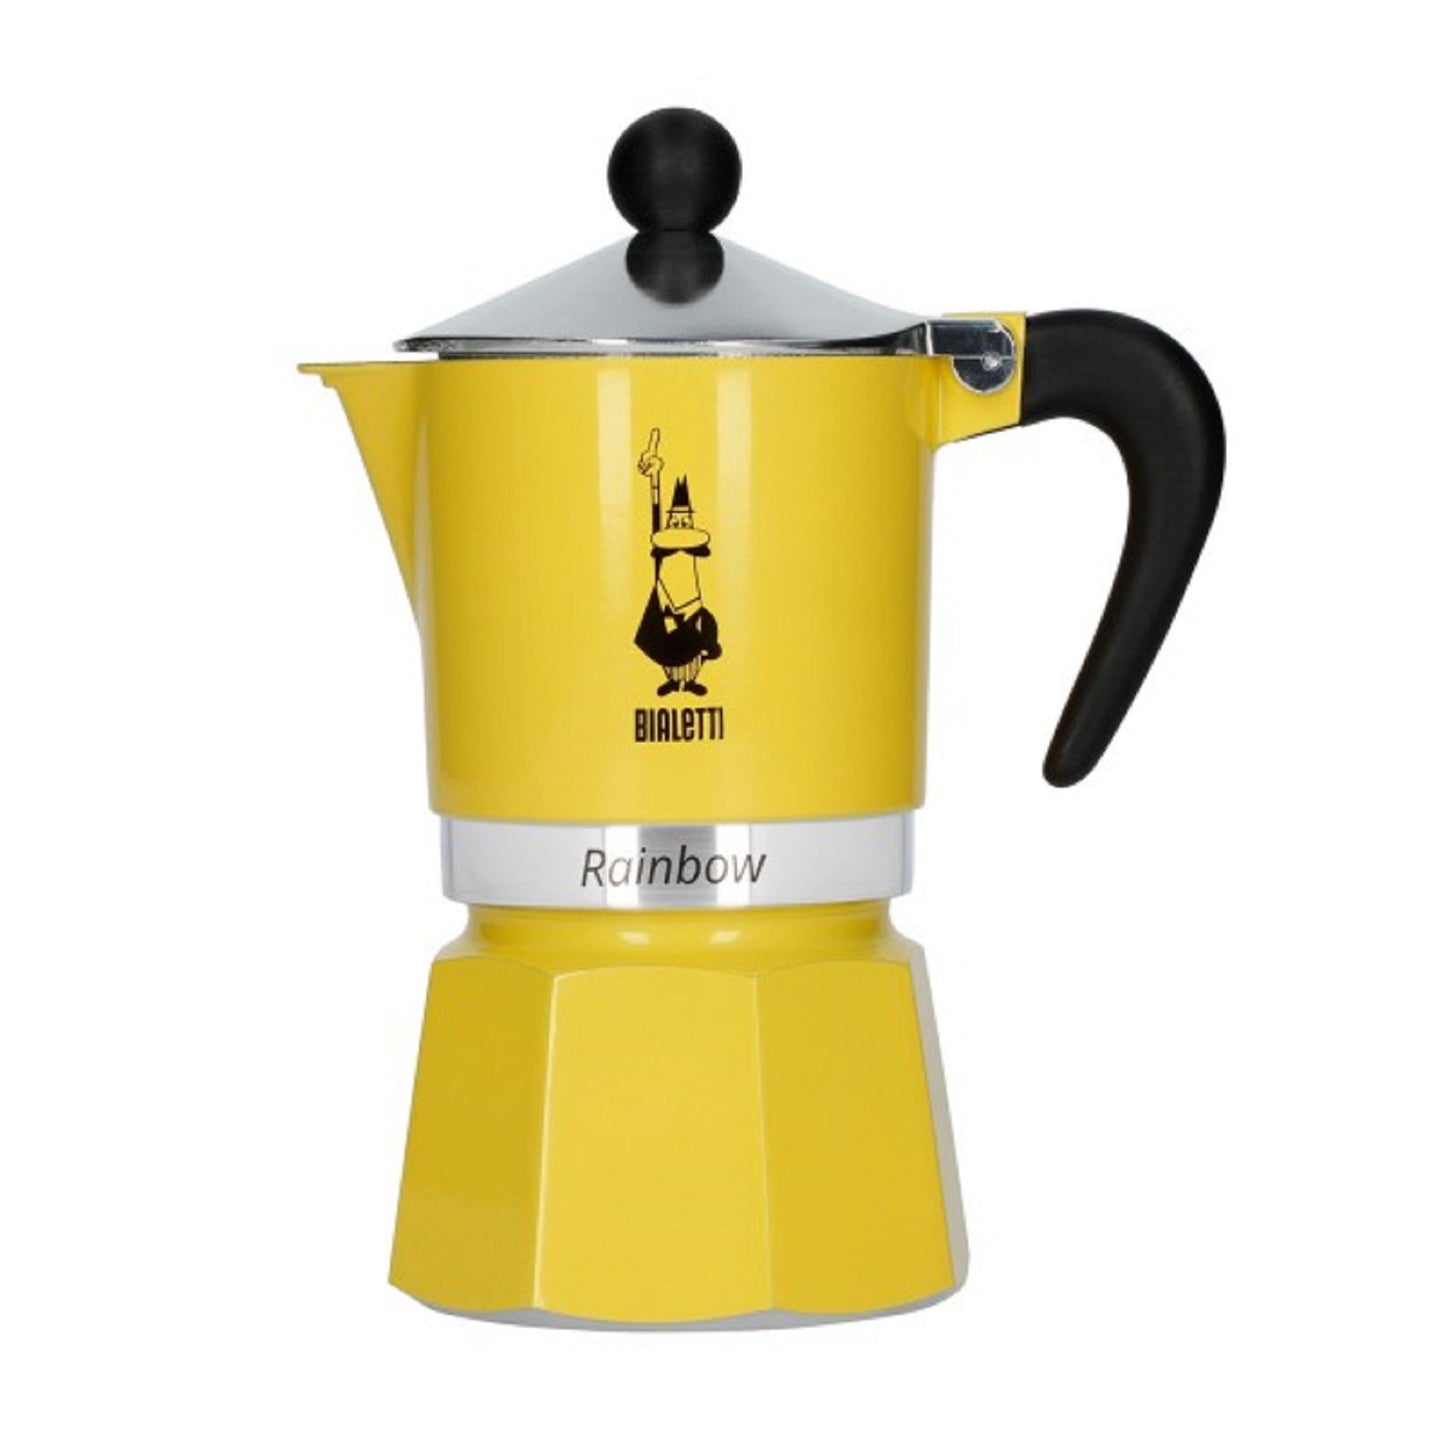 Bialetti -Moka Pot 6 Cup Yellow Metal  Yellow Body,Black plastic Handle and Stainless Steel Lid with Small plastic Black Ball- Velo Coffee Roasters